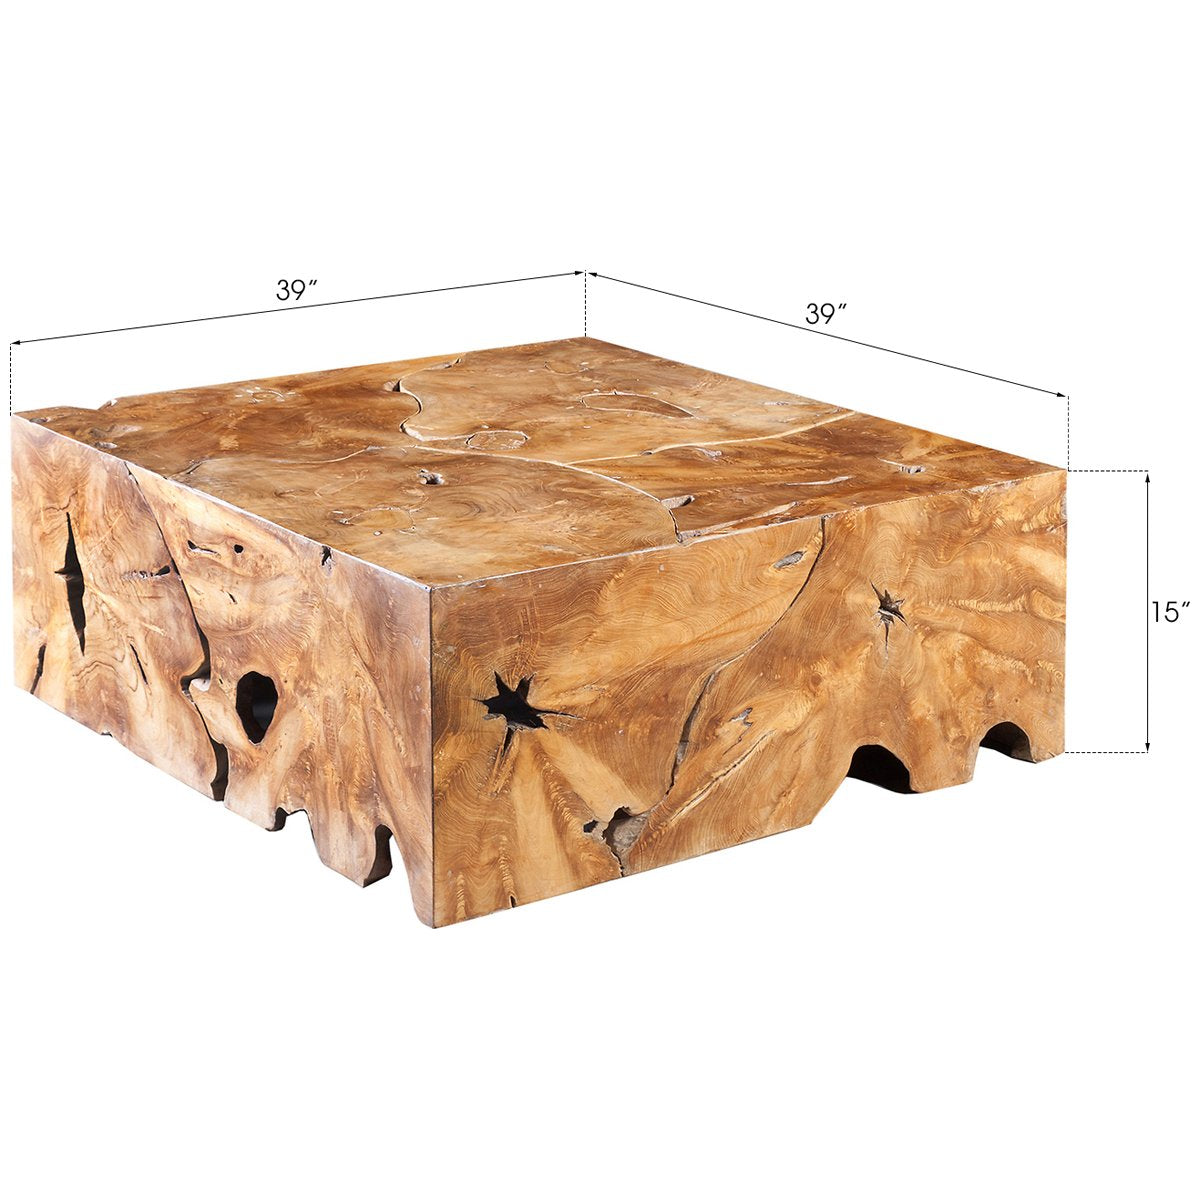 Phillips Collection Teak Slice Coffee Table, Square